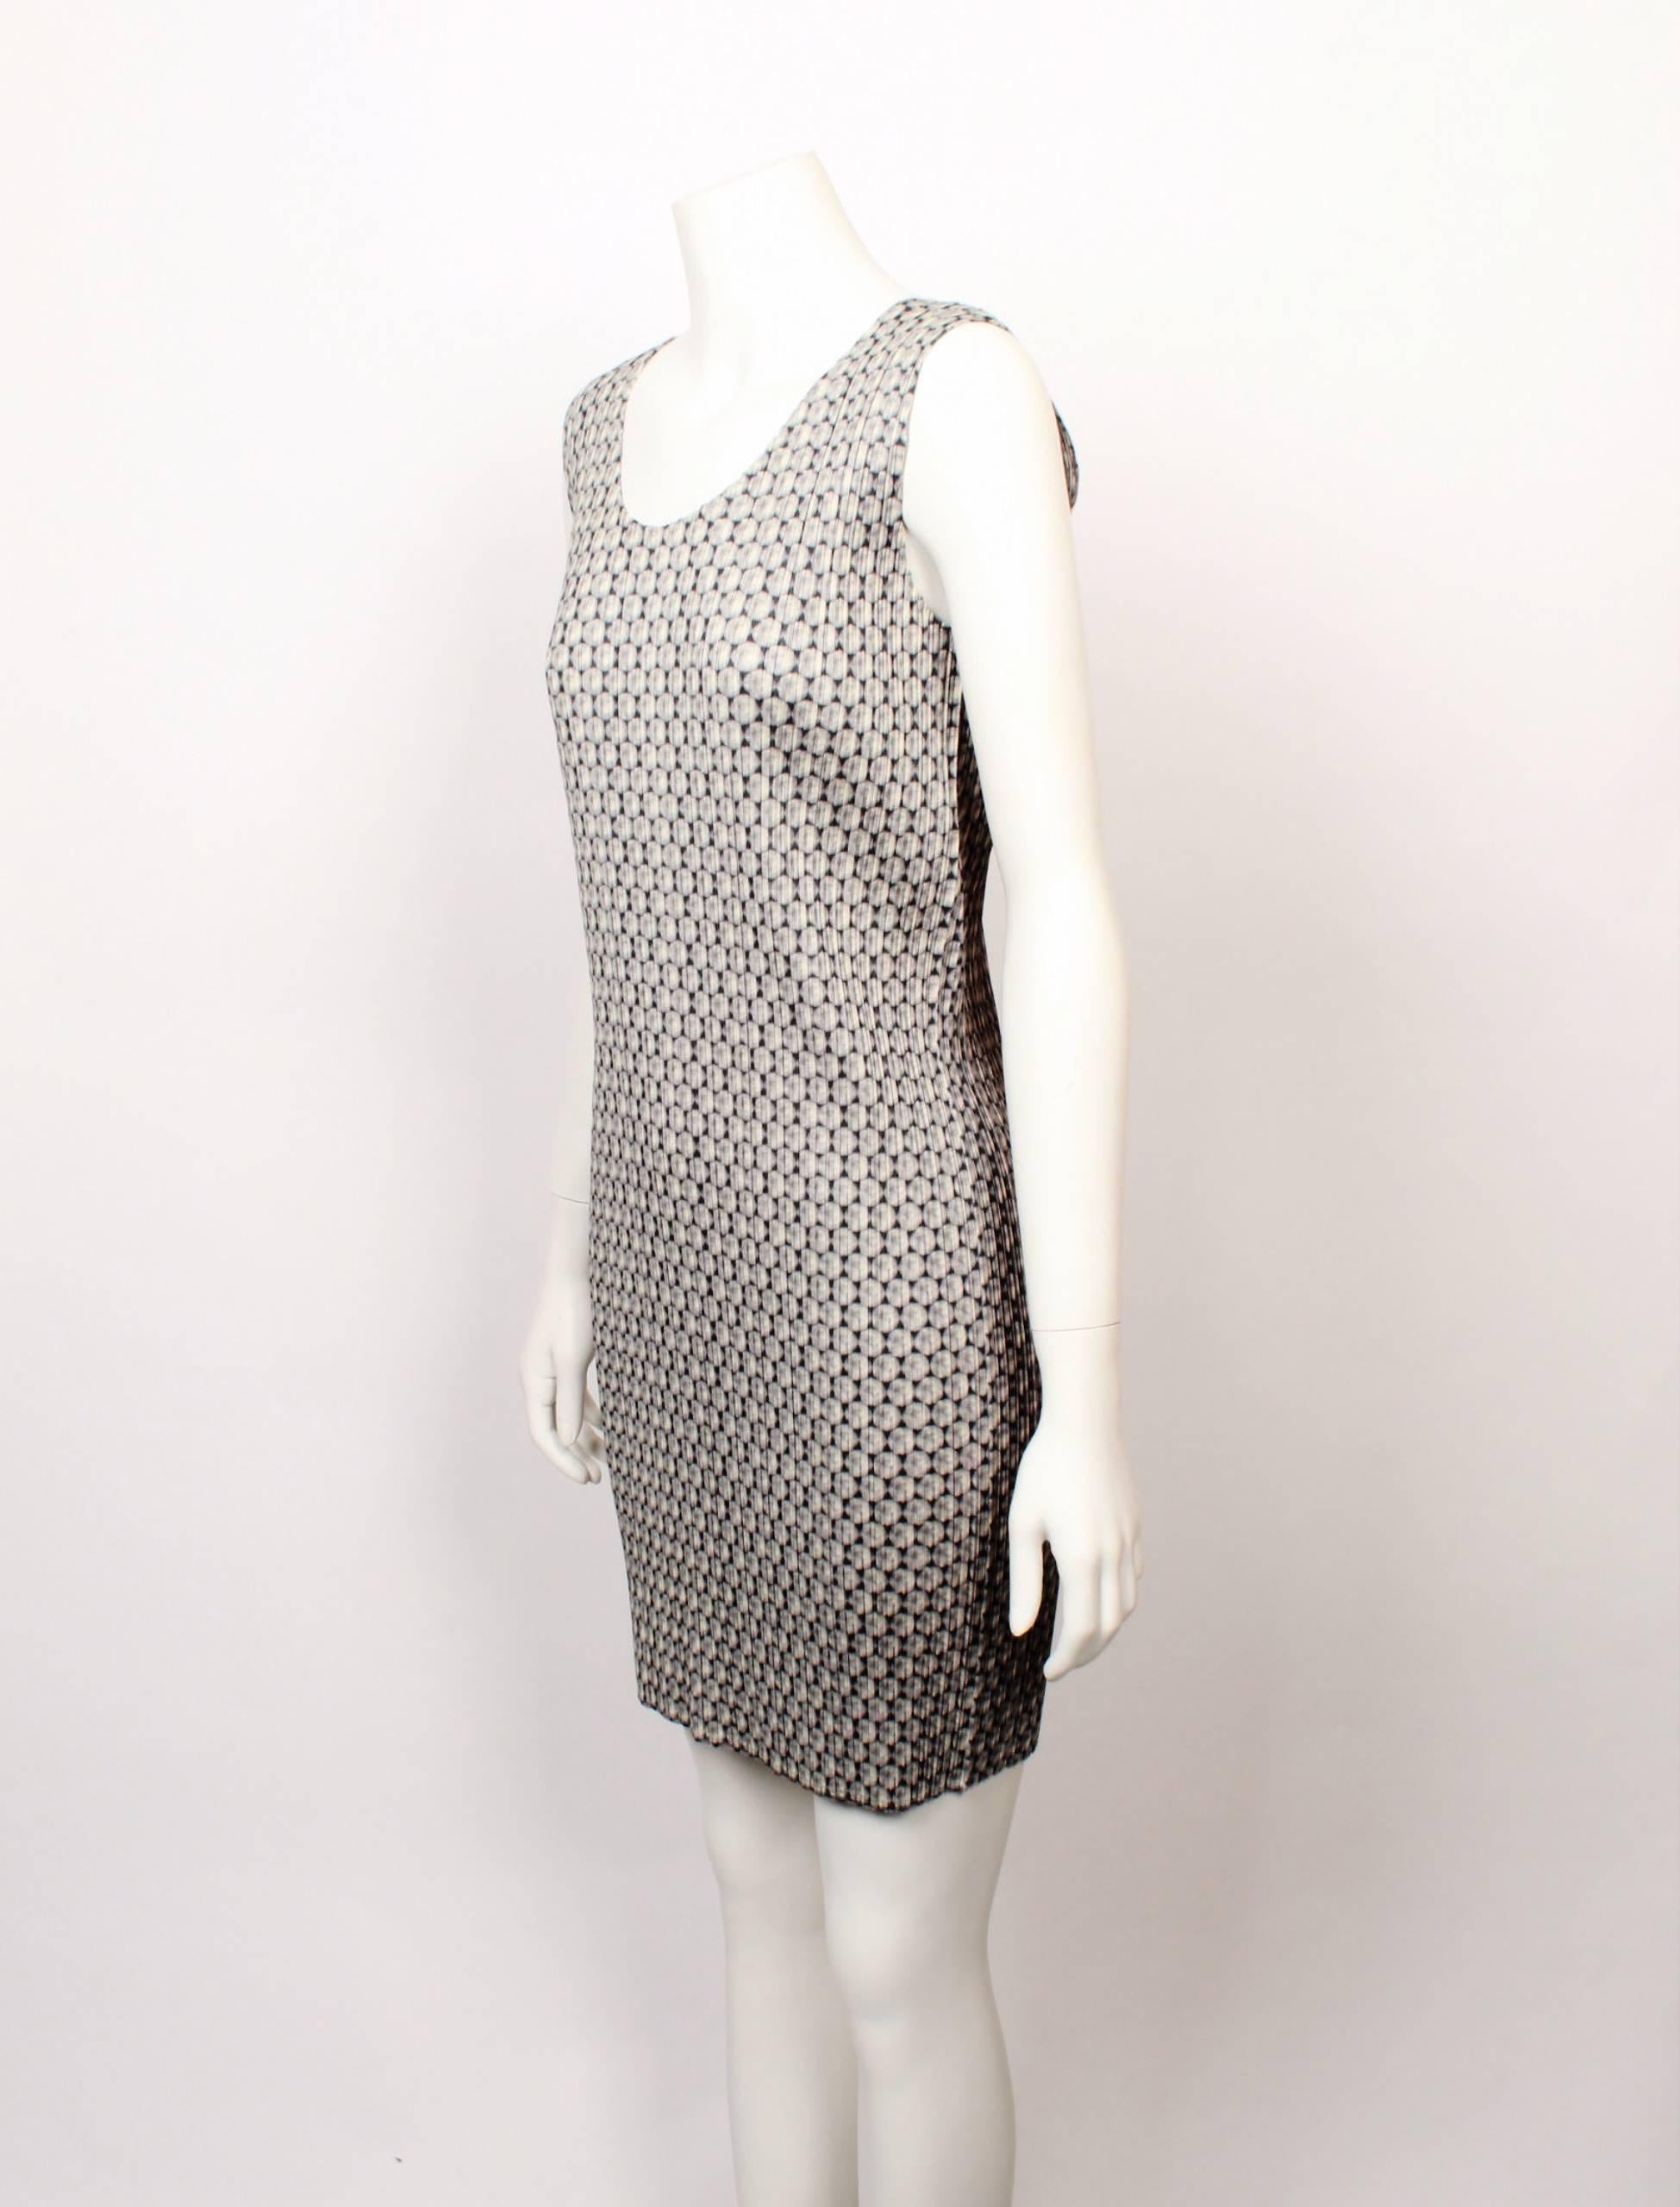 Classic yet always contemporary, 1990s Issey Miyake knee length sleeveless tank shift dress in iconic Issey Miyake pleats. Fabric features spotted pattern in multi grey tones. 

Fabric is stretchy and measurements are with garment flat and